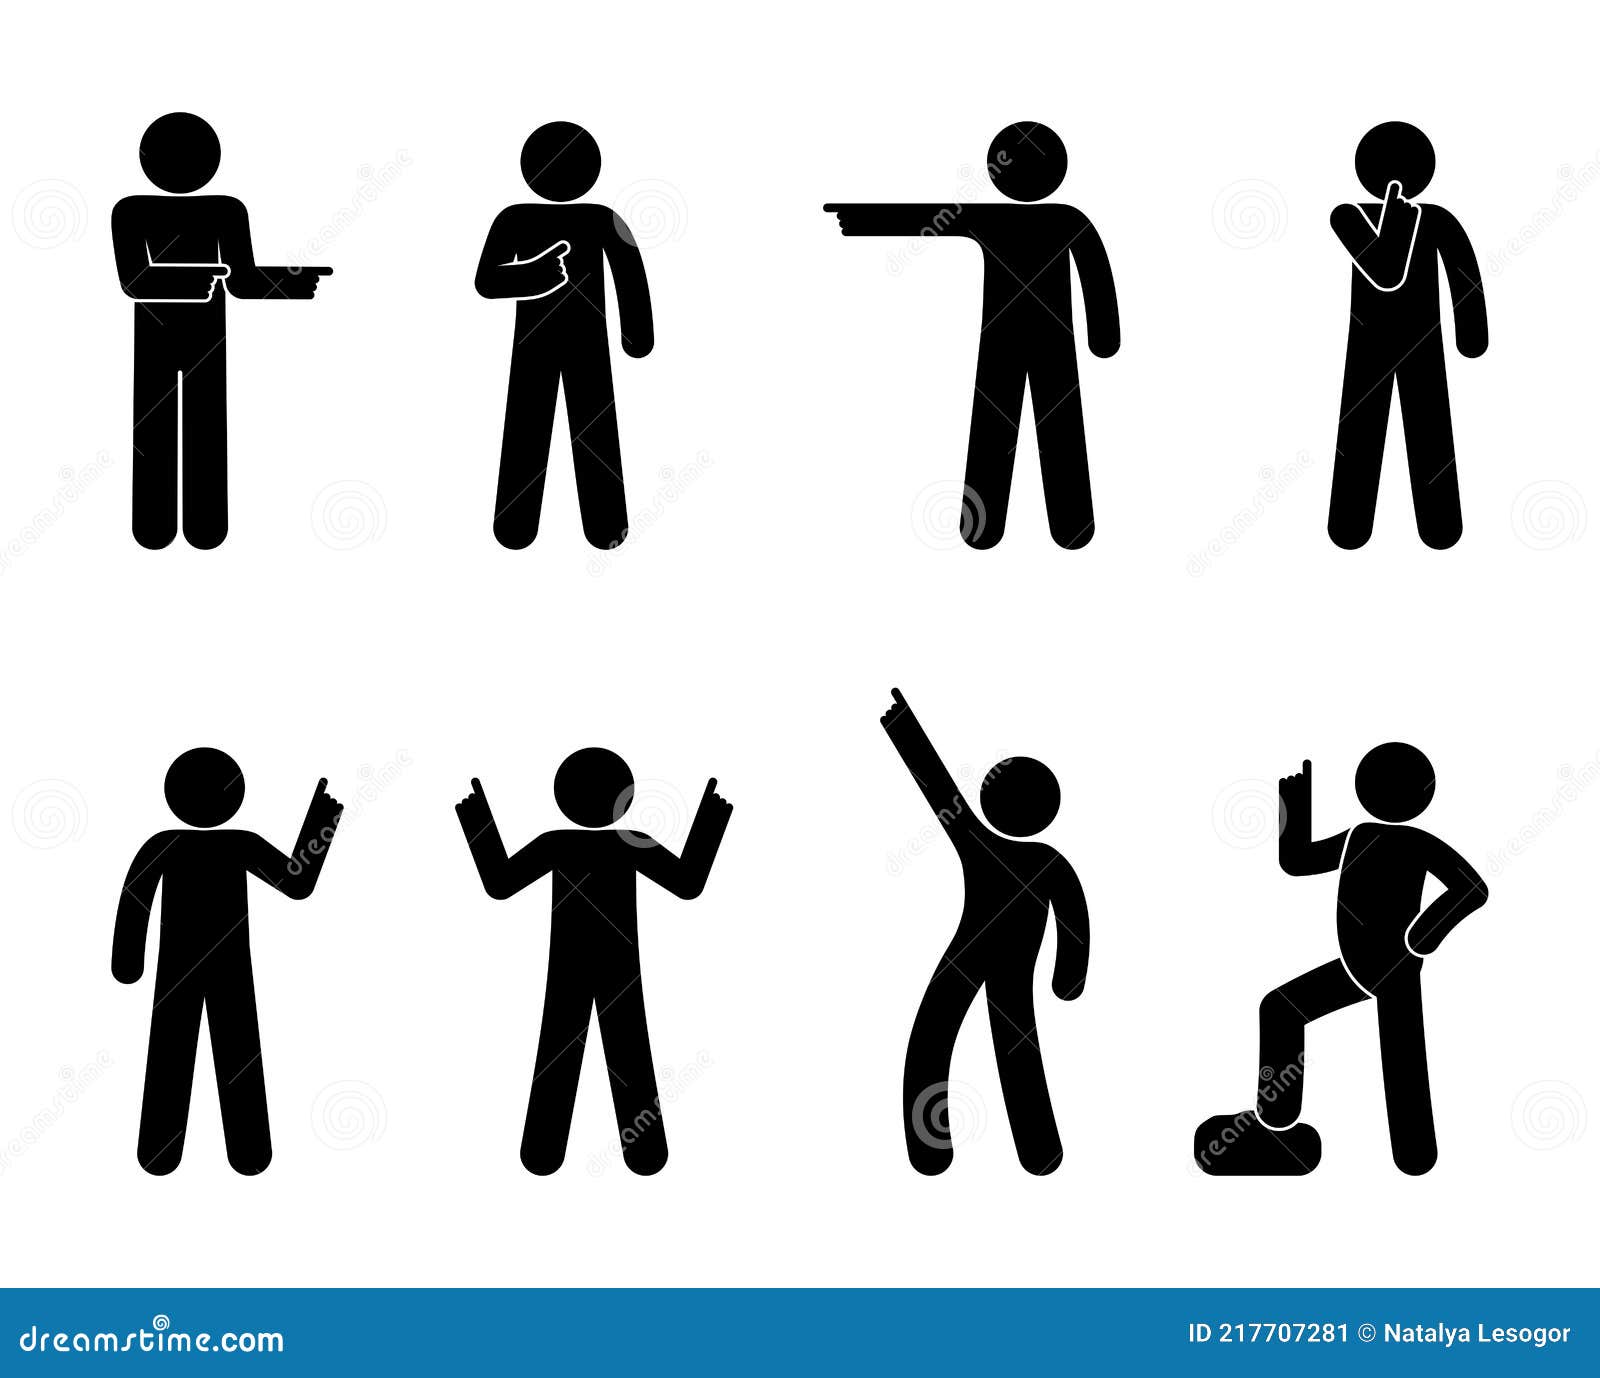 Man Shows His Finger, Gesture Indicates the Direction, Icon Man, Stick  Figure Human Silhouette Stock Vector - Illustration of idea, icon: 217707281